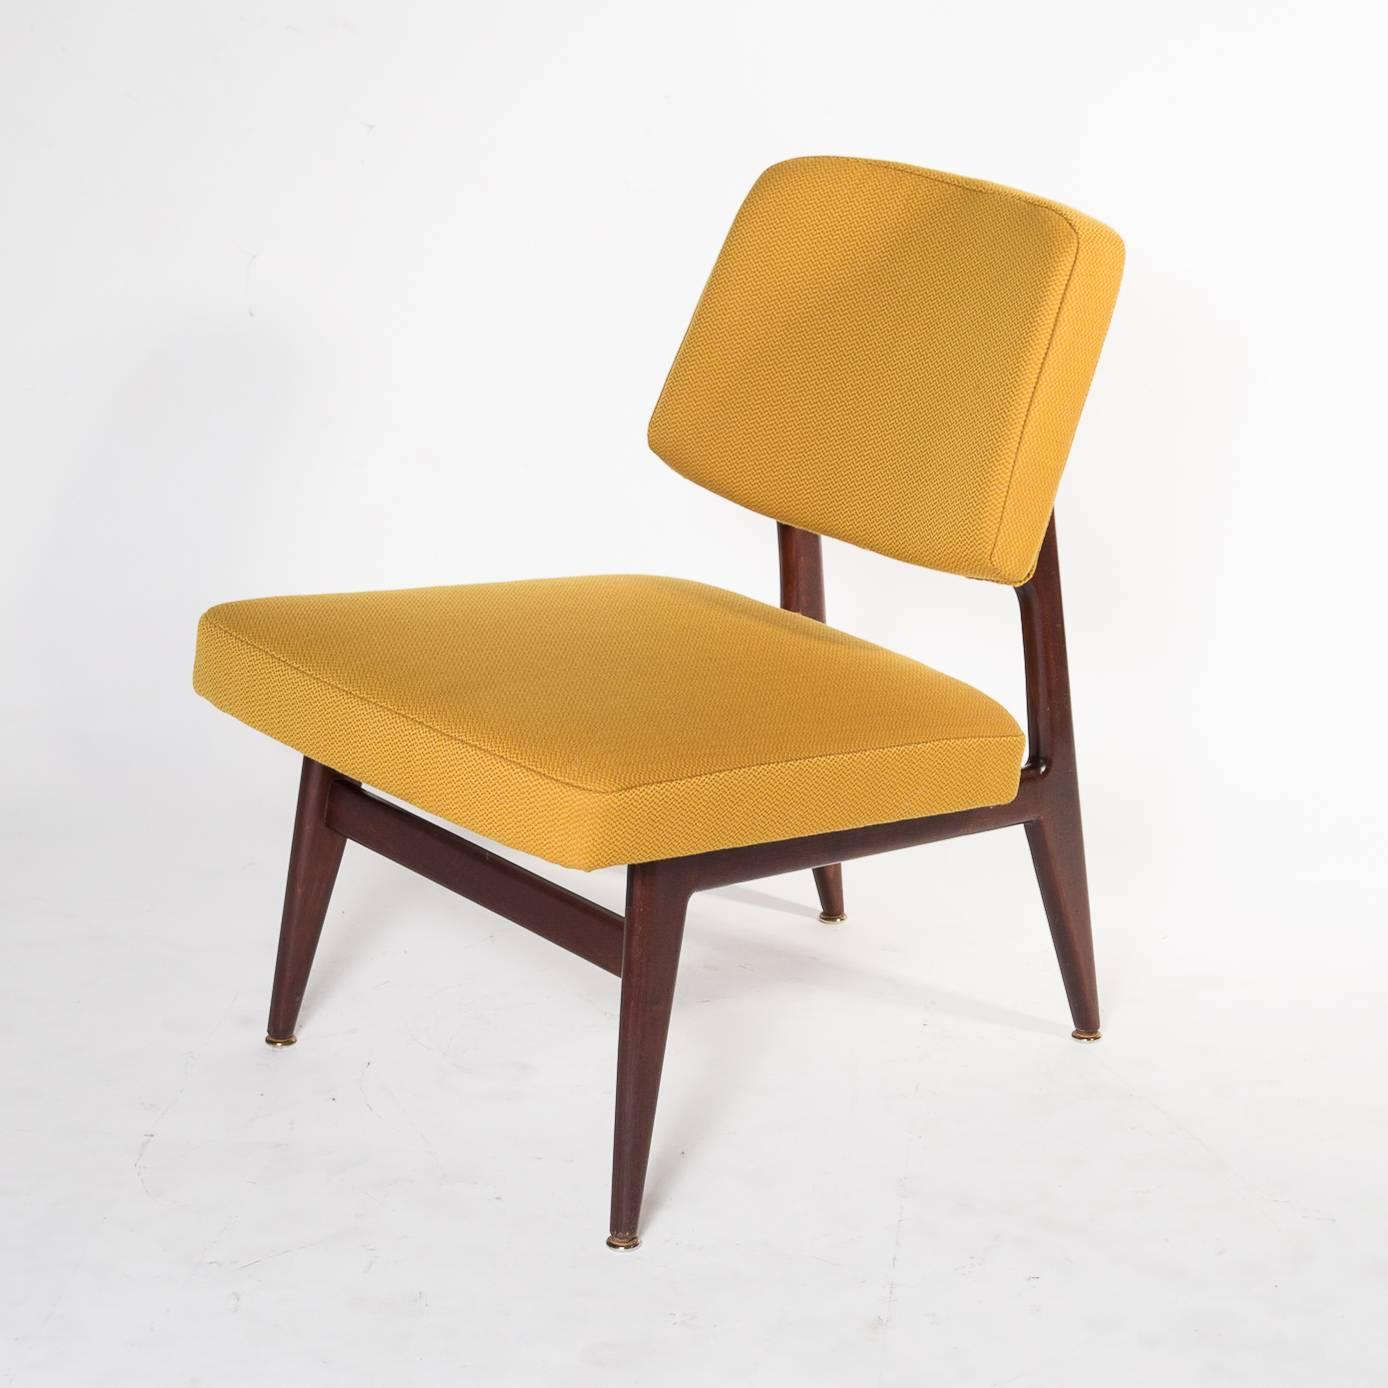 Newly upholstered with a wooden walnut frame.
Designed in 1958 by G. Eberle.